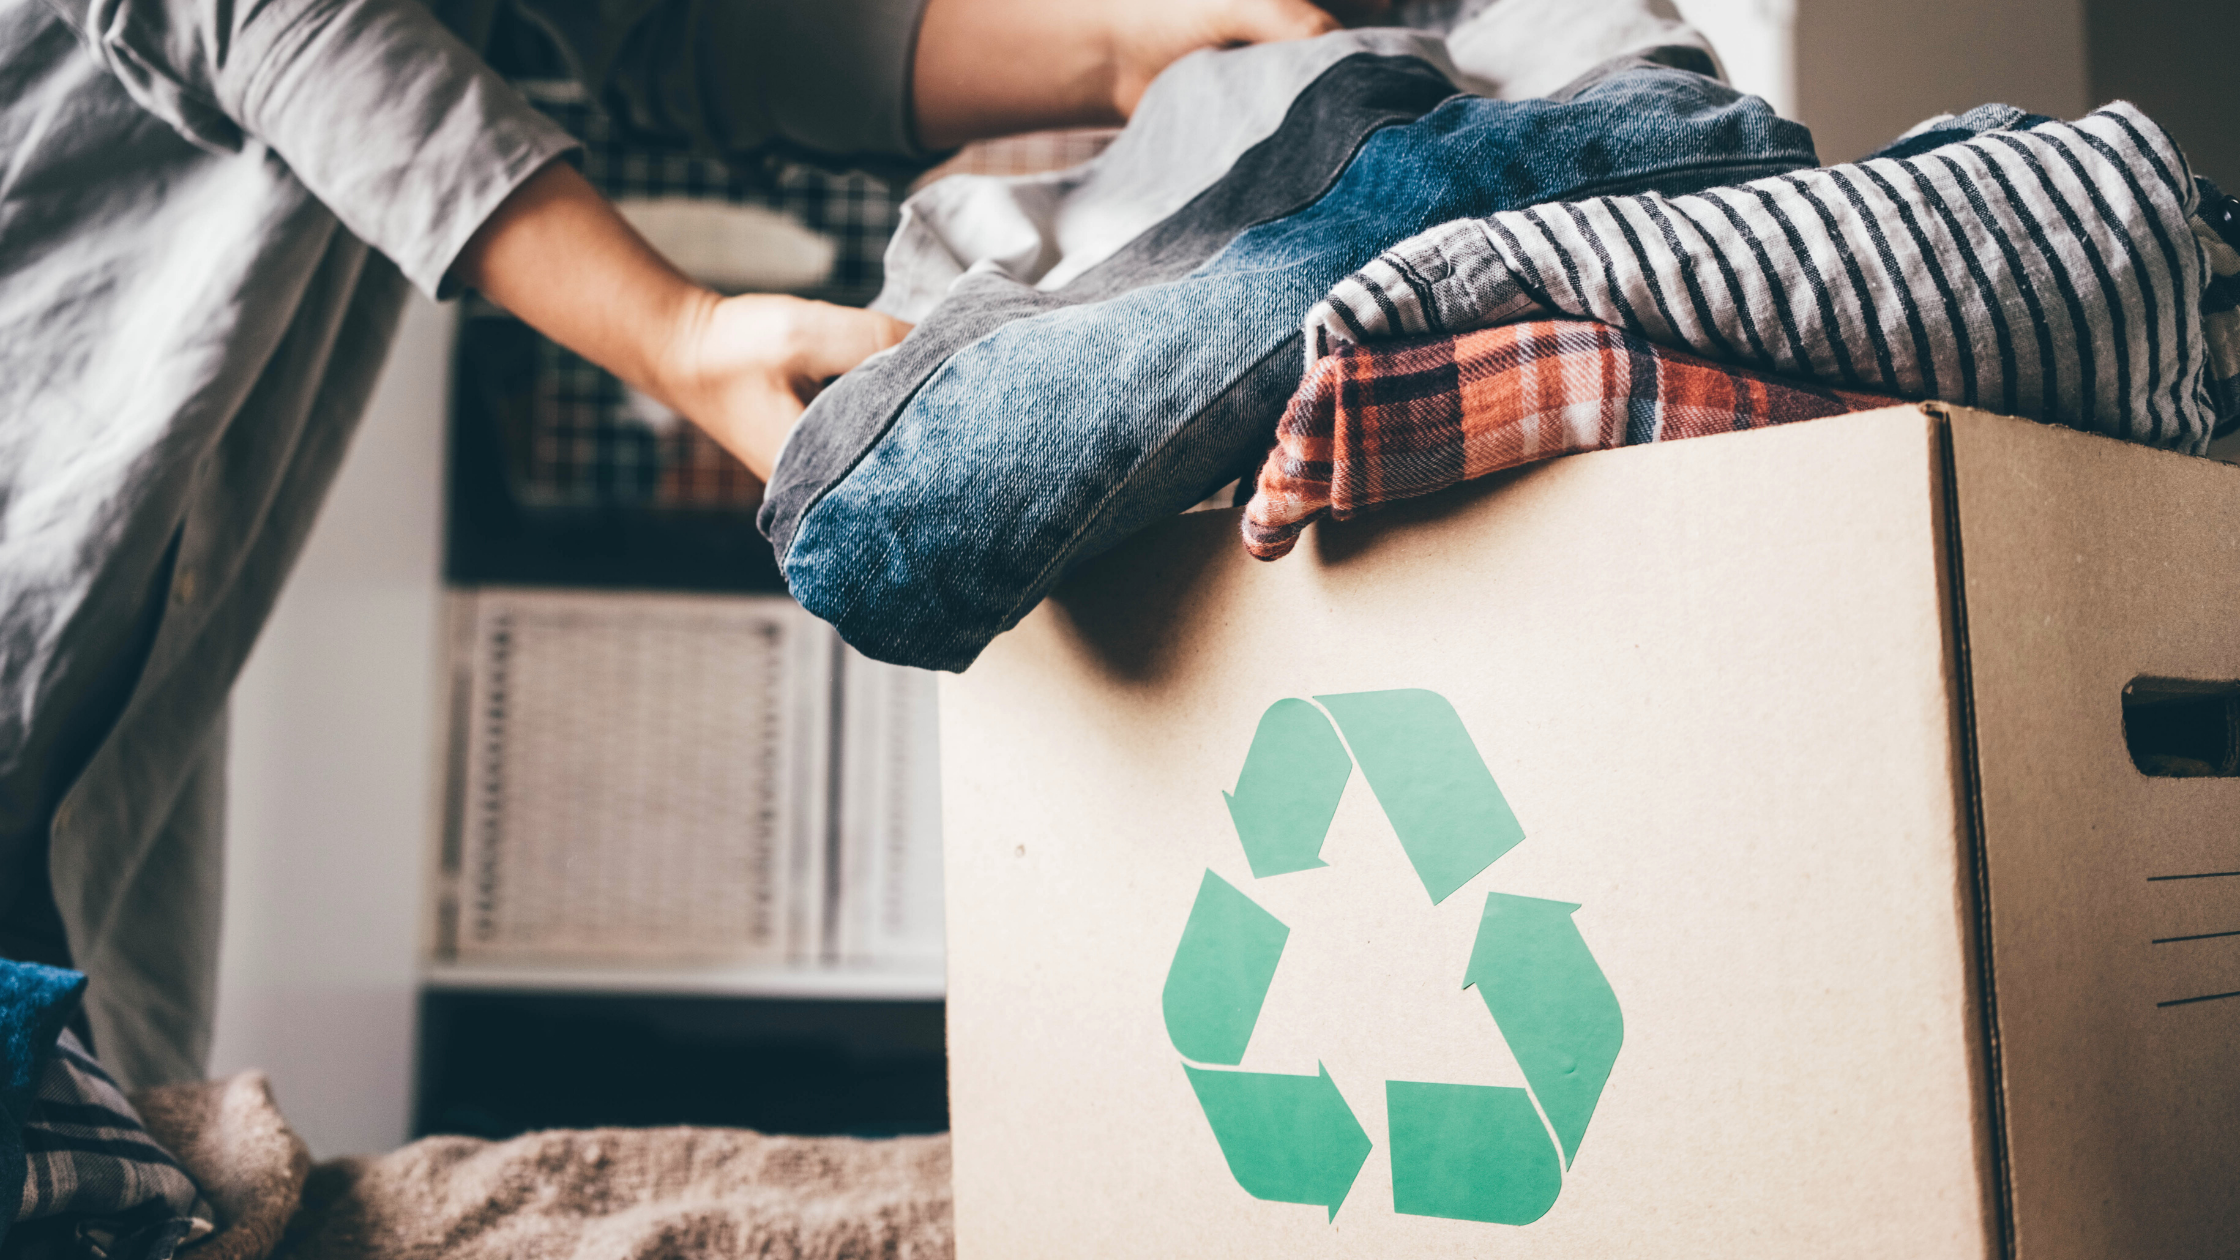 Recycled Clothing: Top 5 Clothing Brands That Use Recycled Materials